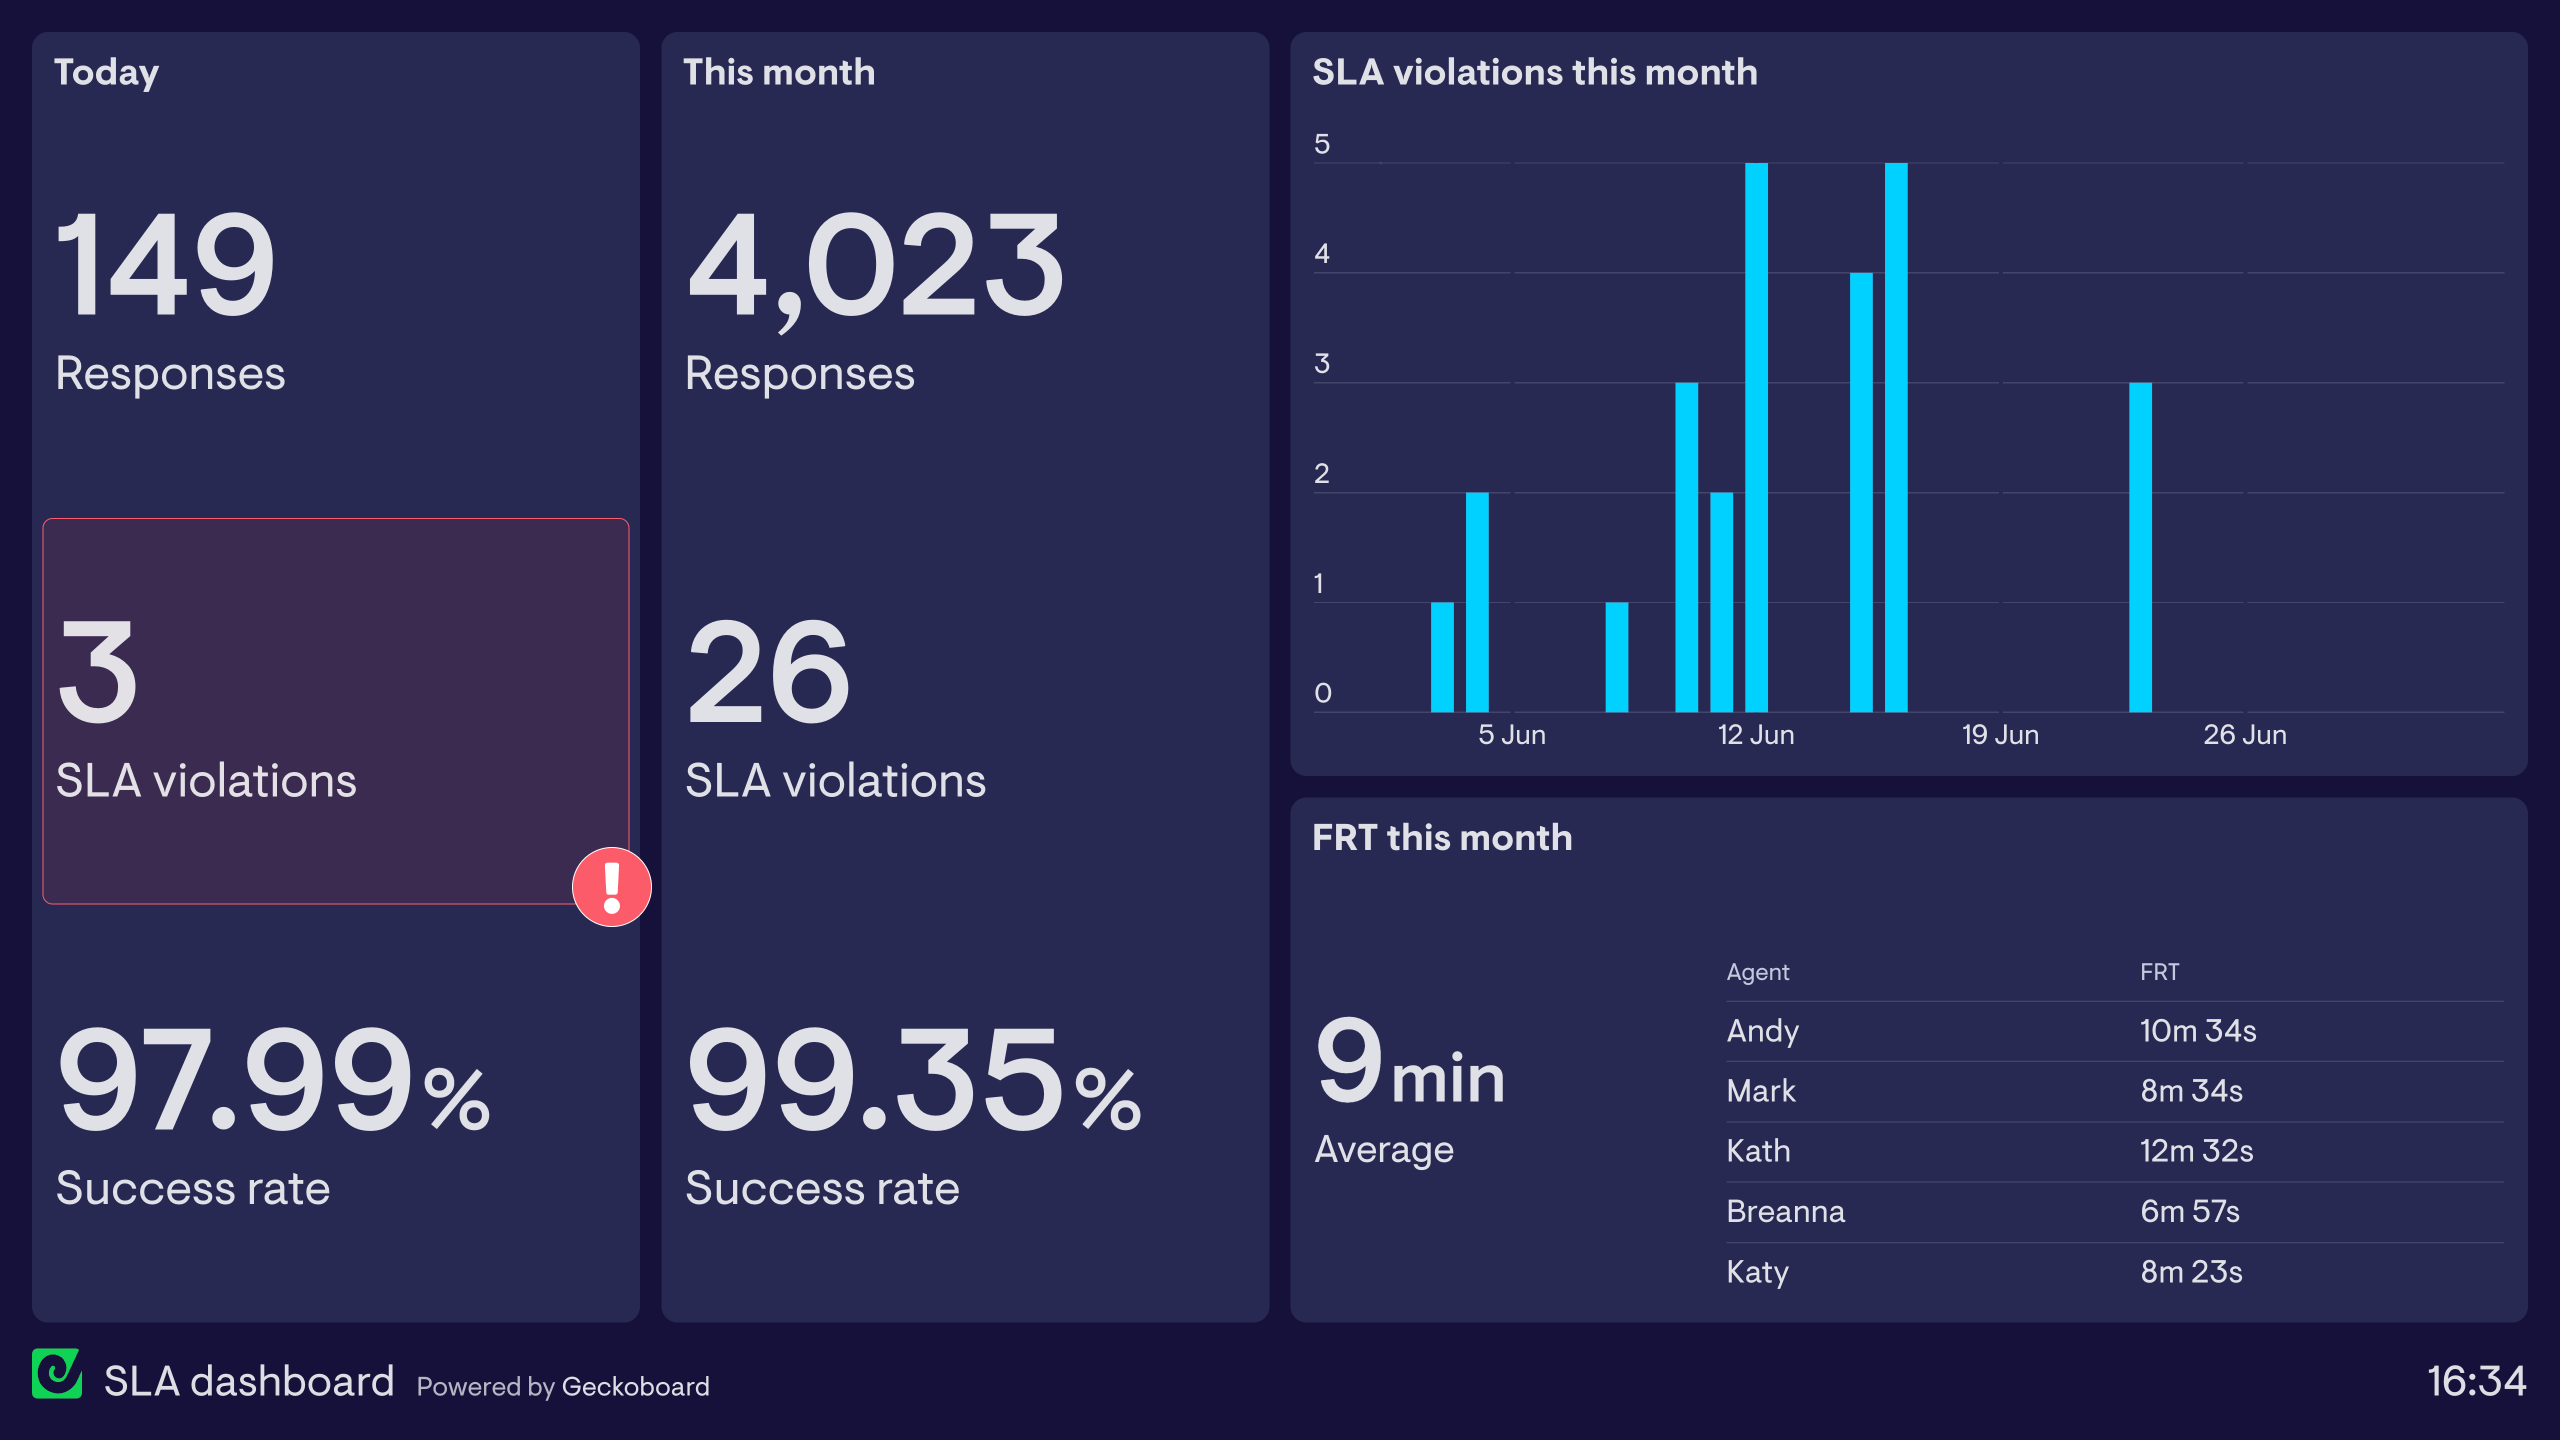 Support dashboard example